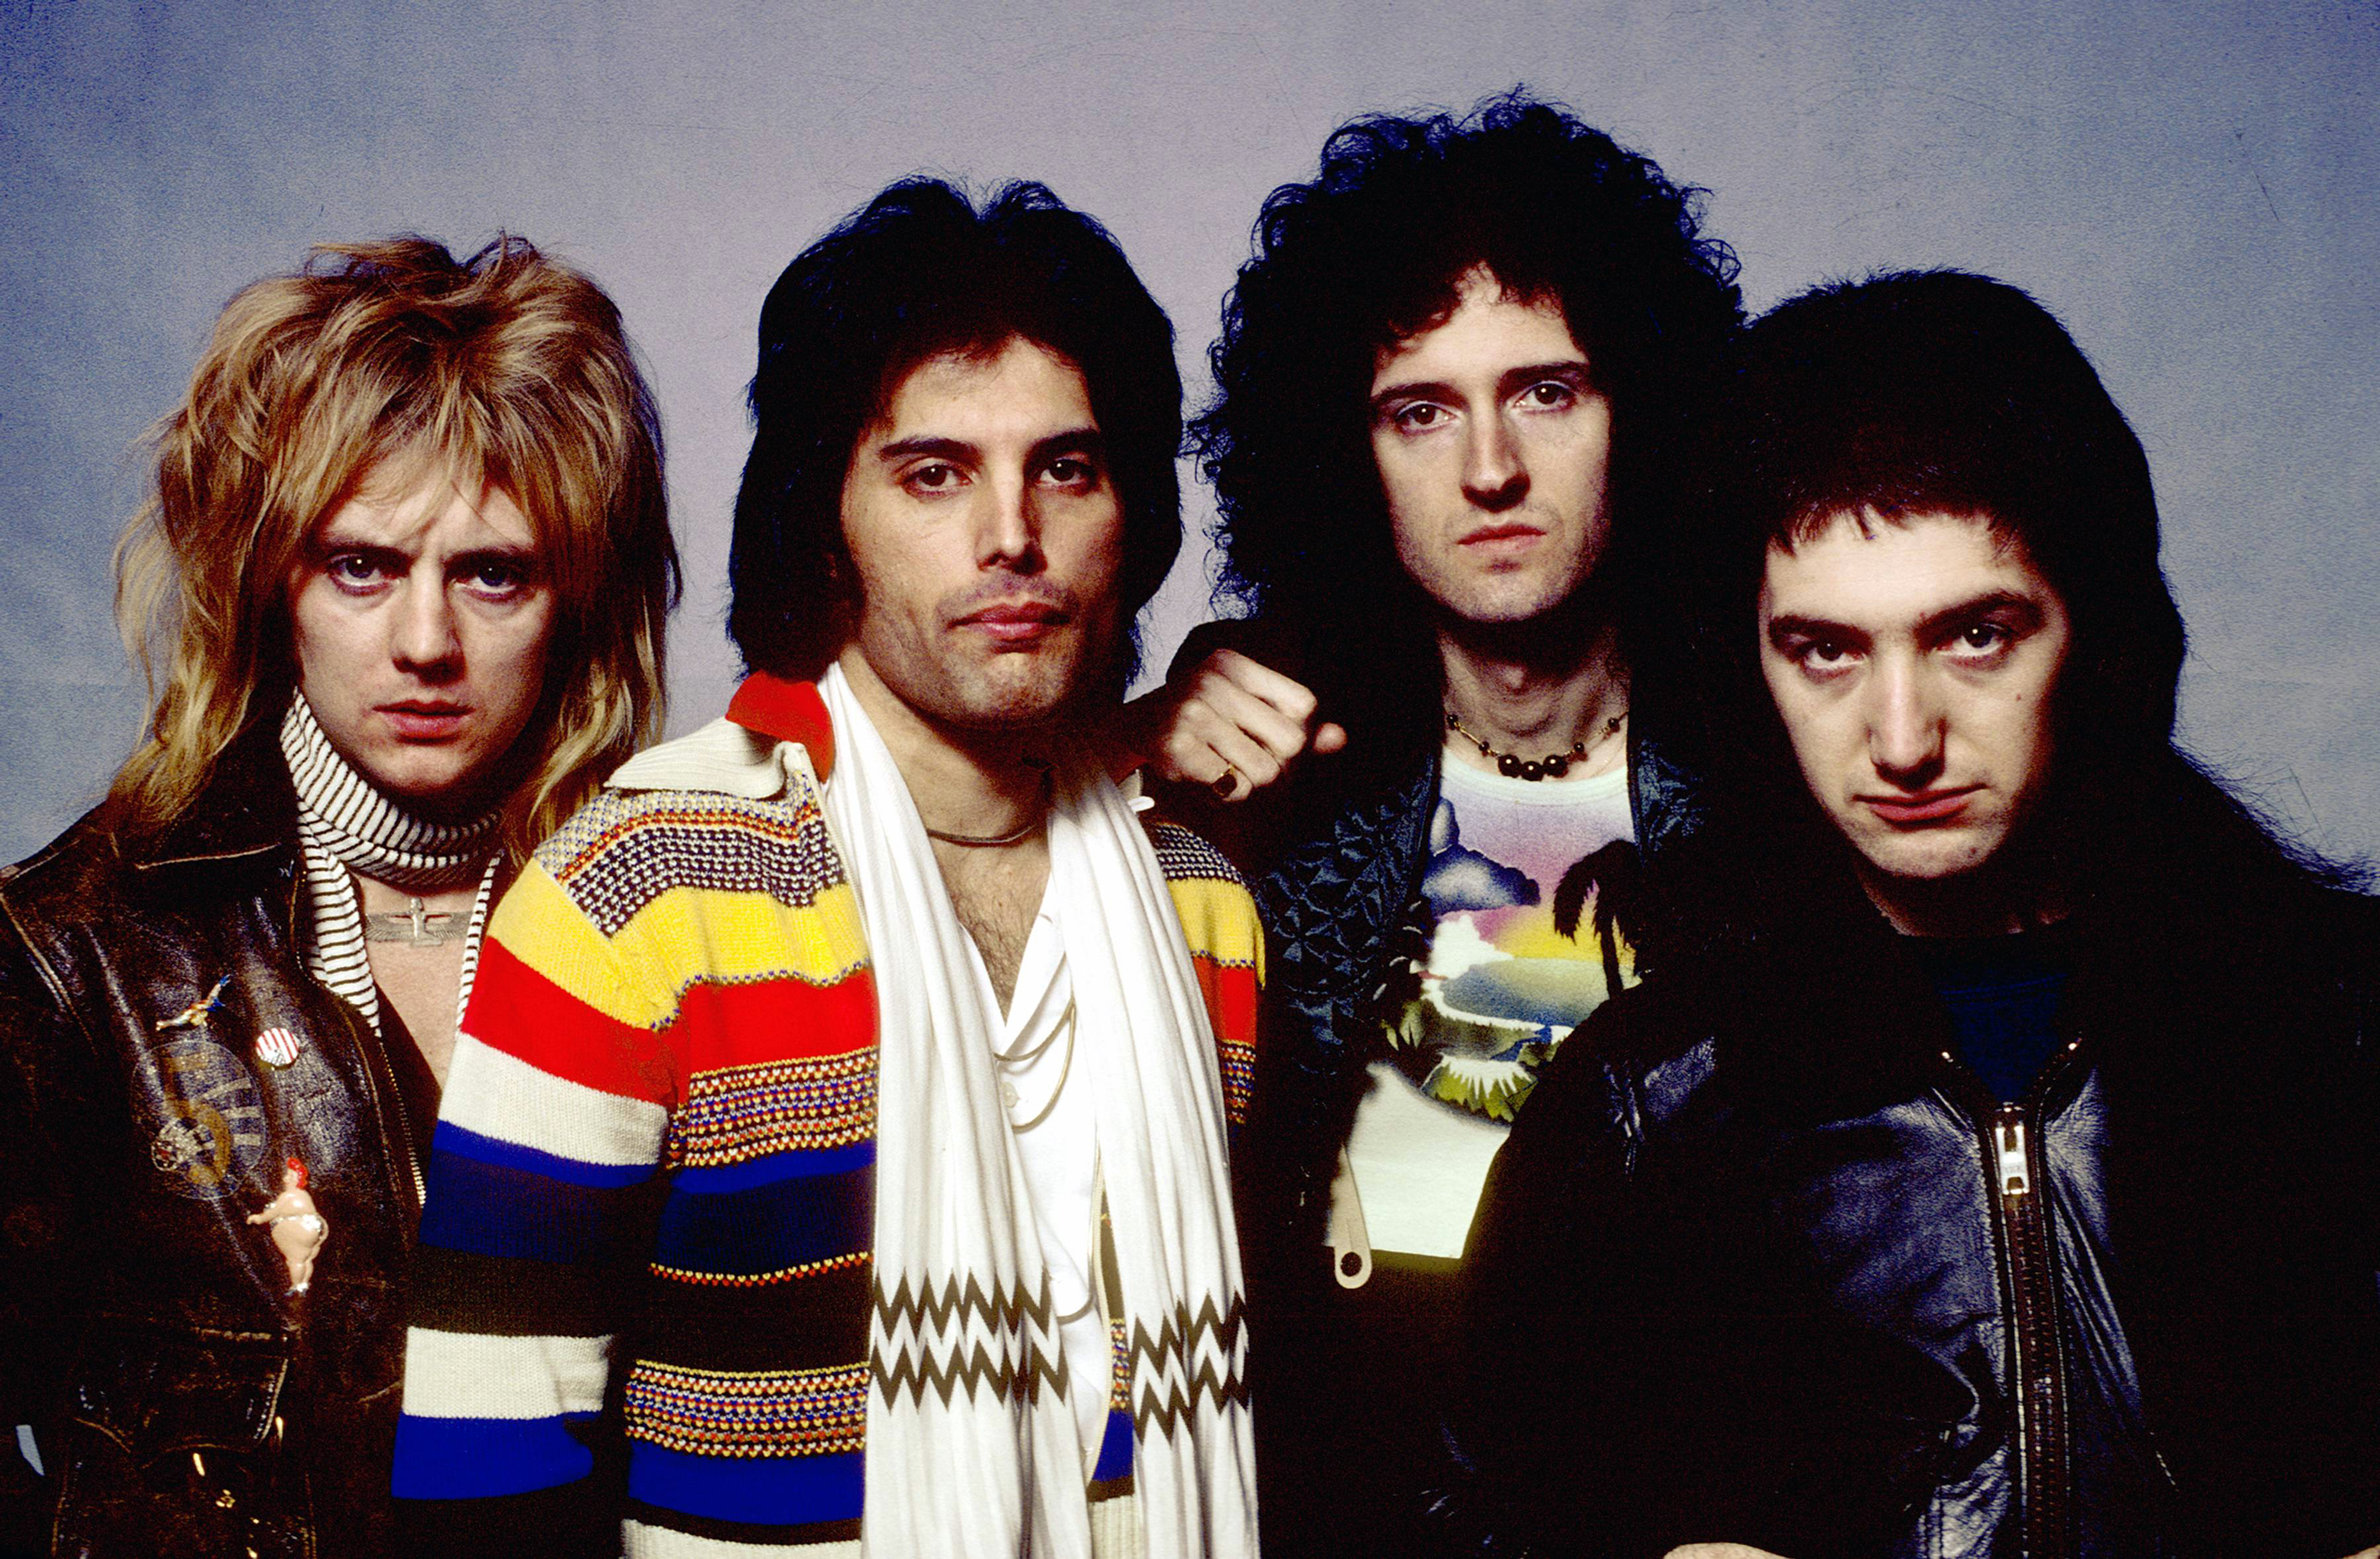 Four members of the band Queen